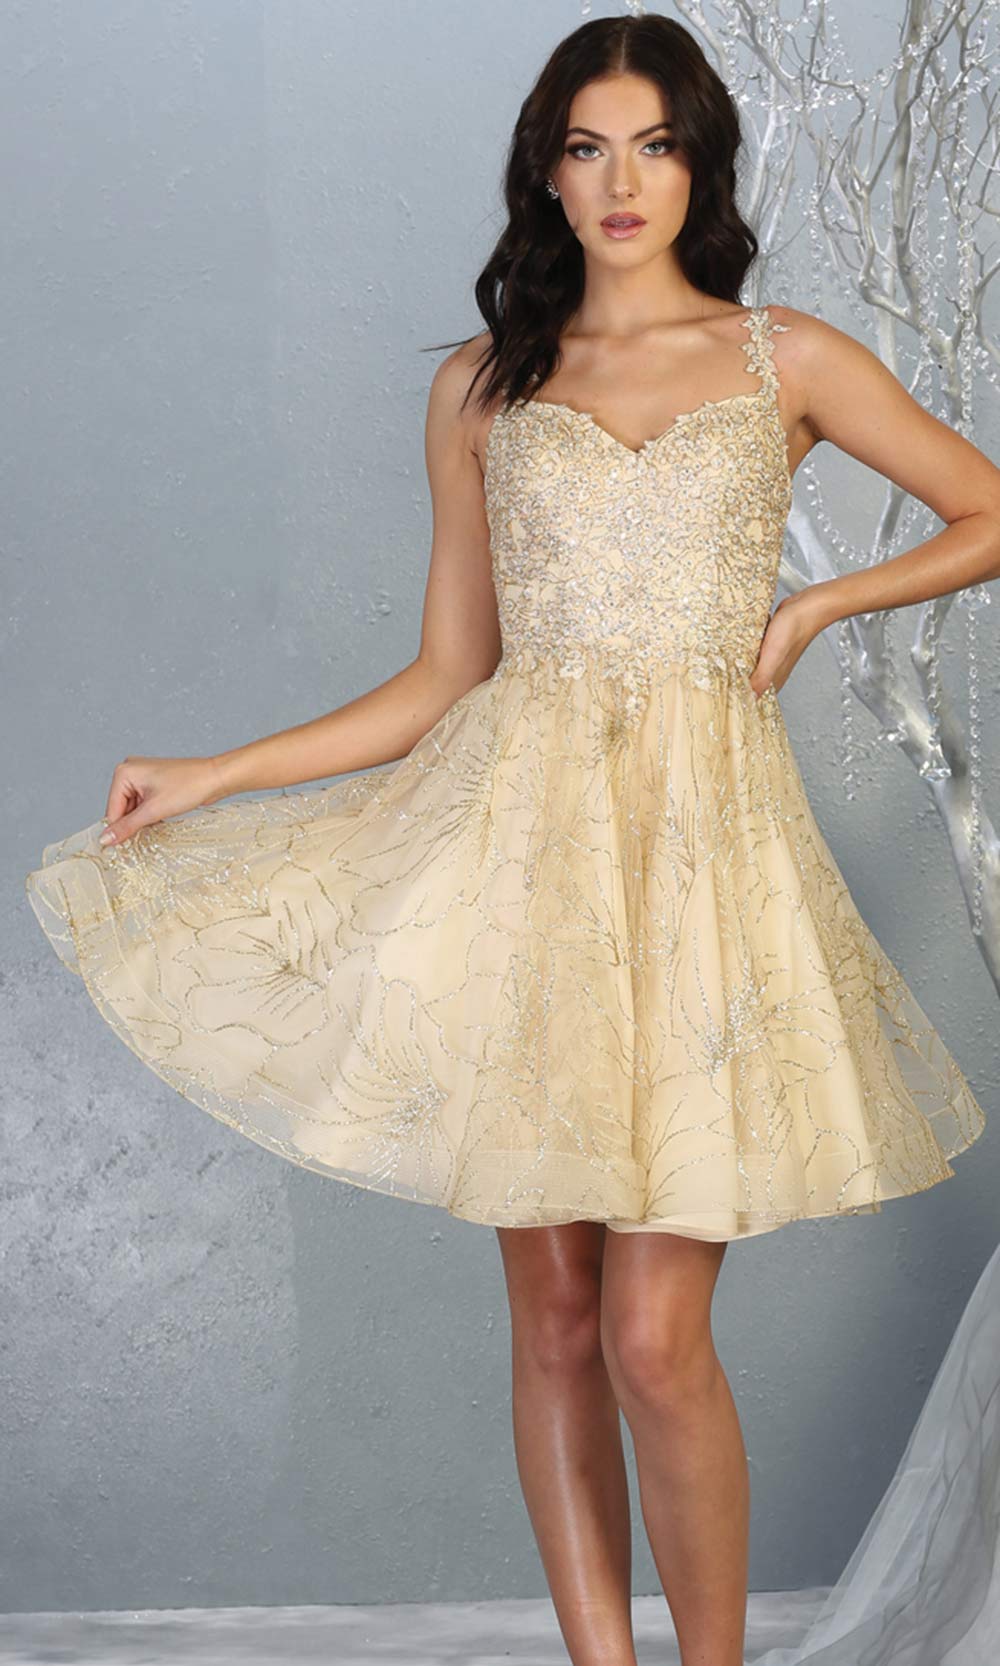 Mayqueen MQ1753 short champagne gold flowy v neck glittery sequin grade 8 graduation dress w/straps.This light gold party dress is perfect for prom, graduation, grade 8 grad, confirmation dress, bat mitzvah dress, damas.Plus sizes avail for grad dress.jpggrade 8 grad dresses, graduation dresses